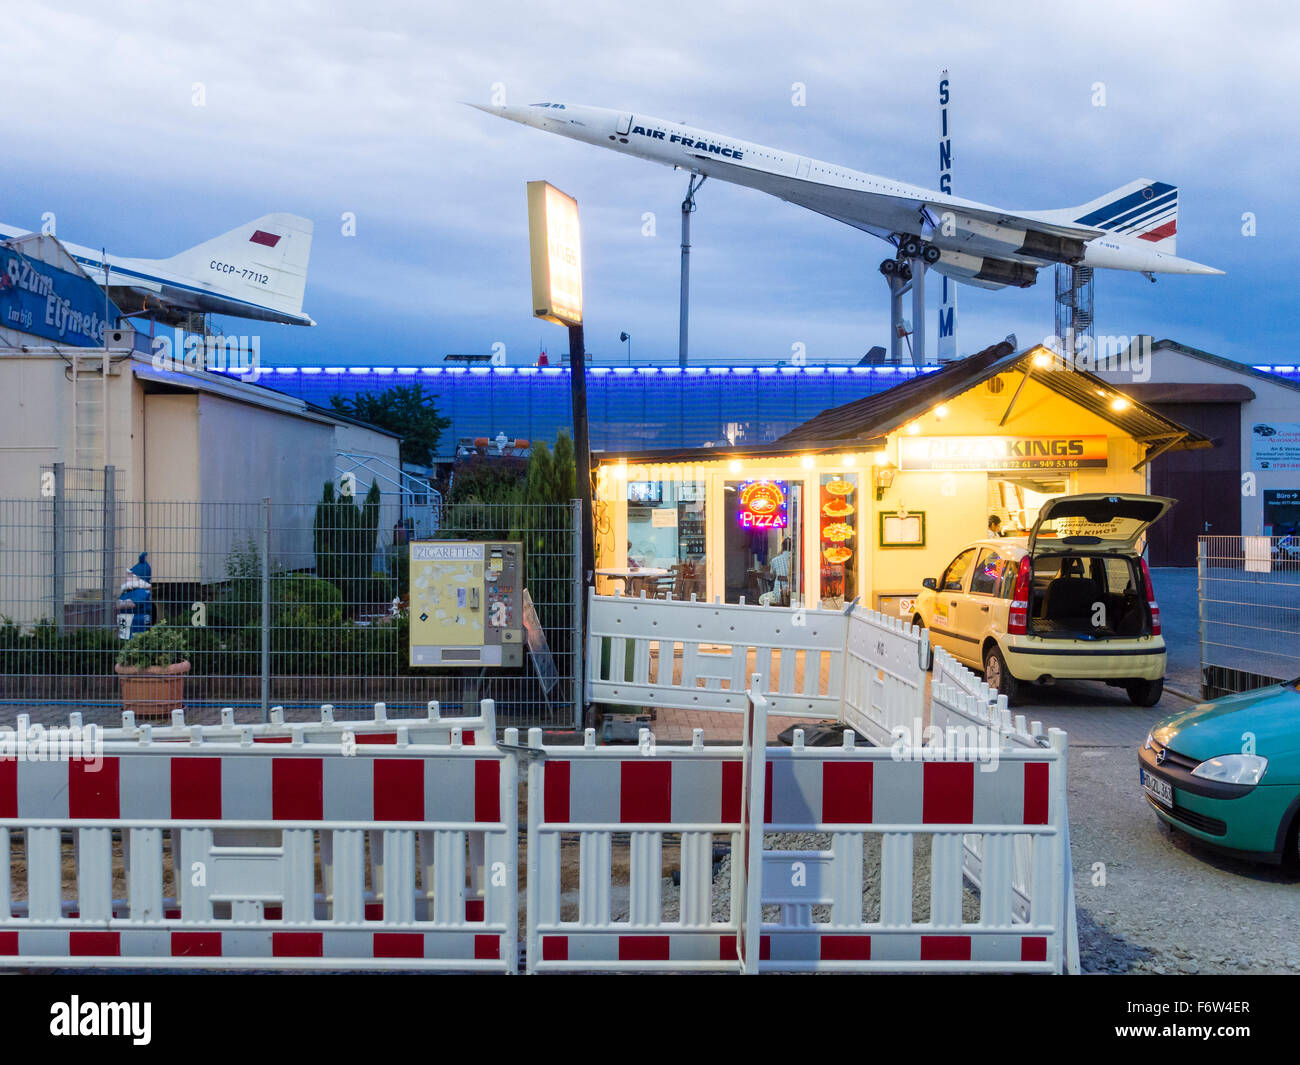 A discarded Tupolev Tu-144 and a Concorde supersonic passenger aircraft, both on display at the rooftop of a German museum. Stock Photo